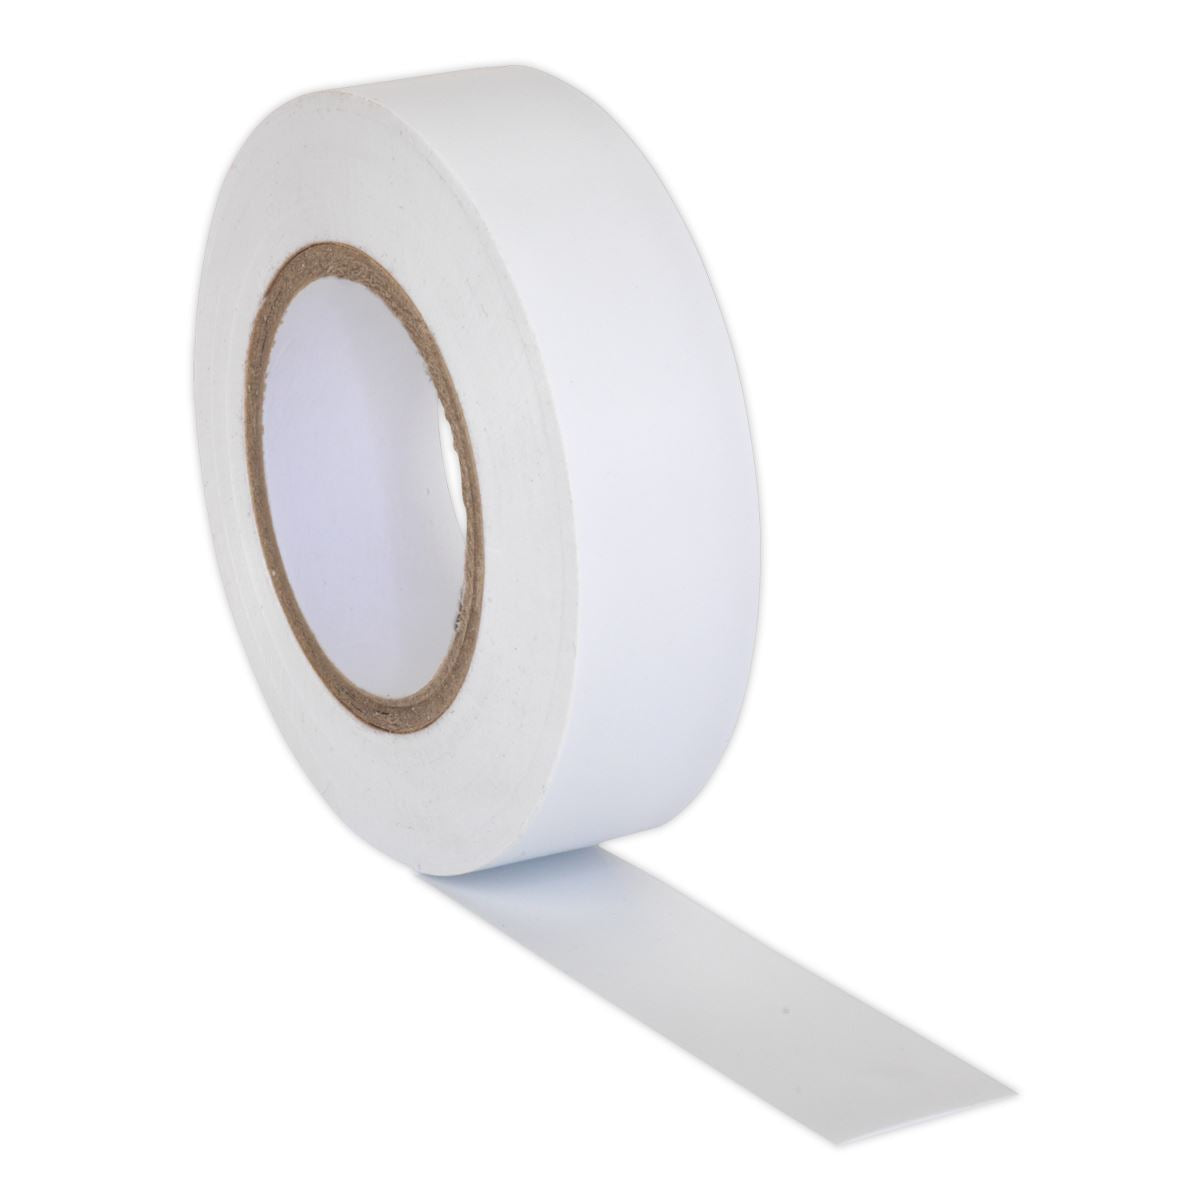 Sealey PVC Insulating Tape 19mm x 20m White Pack of 10